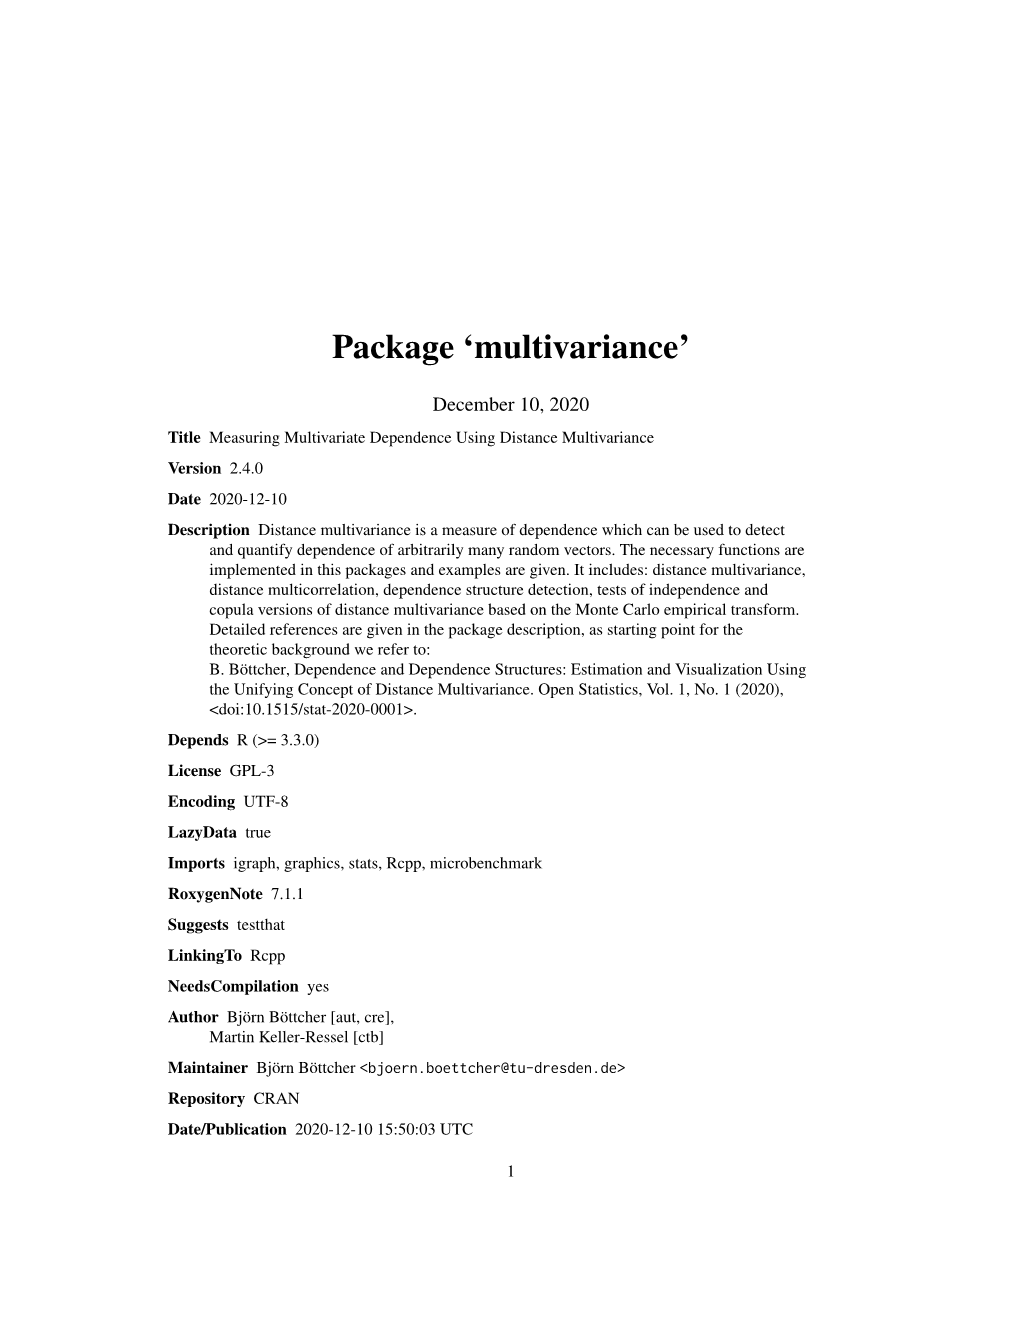 Package 'Multivariance'